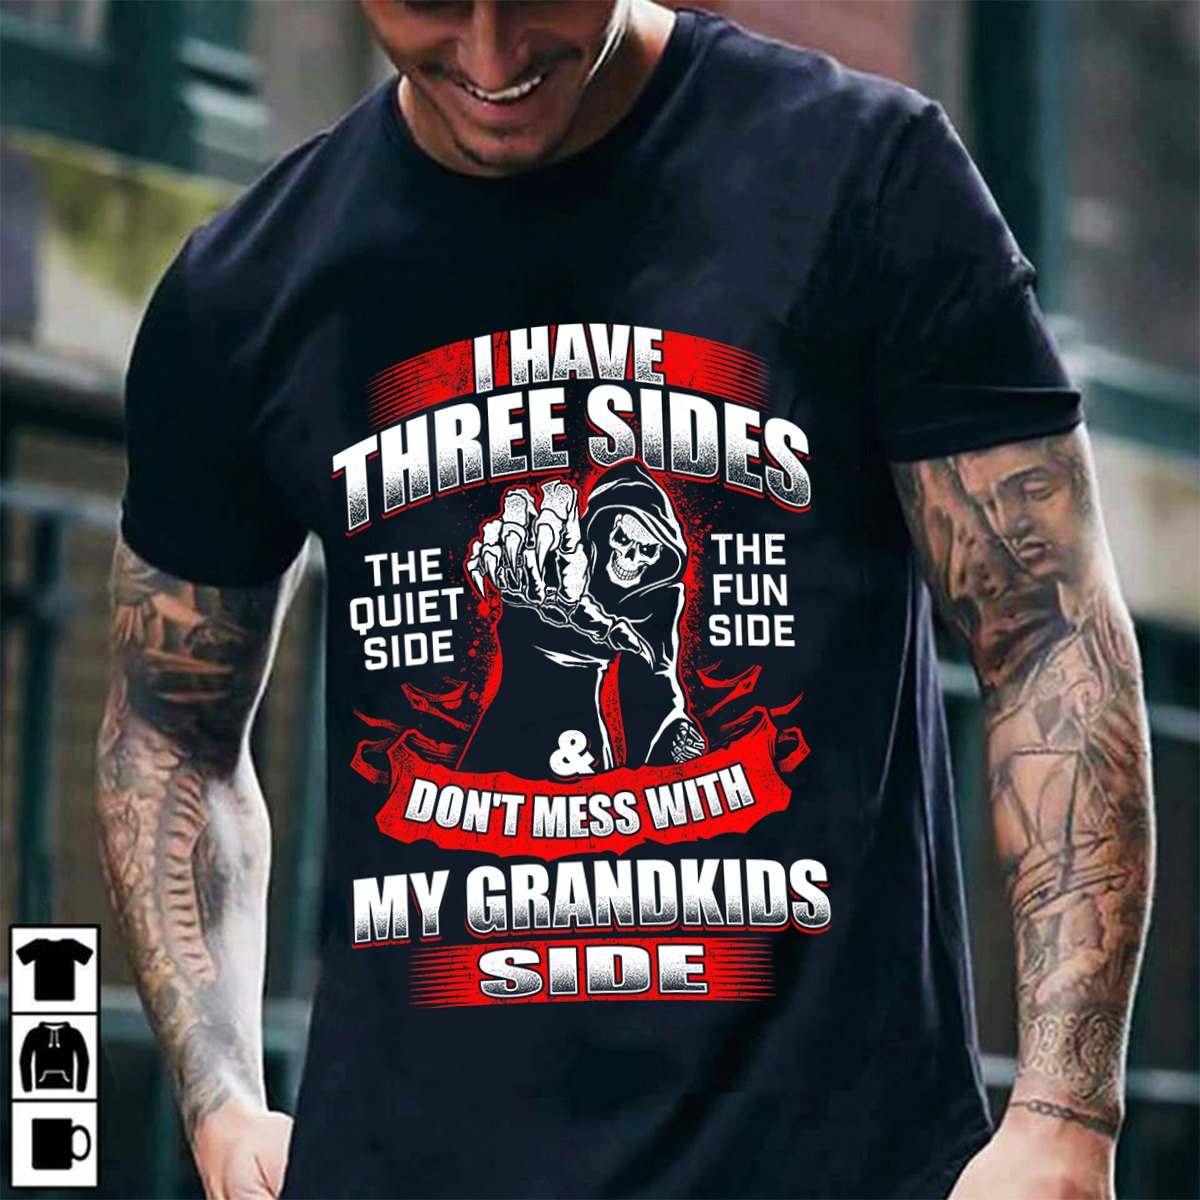 I have three sides the quiet side, the fun side and don't mess with my grandkids side